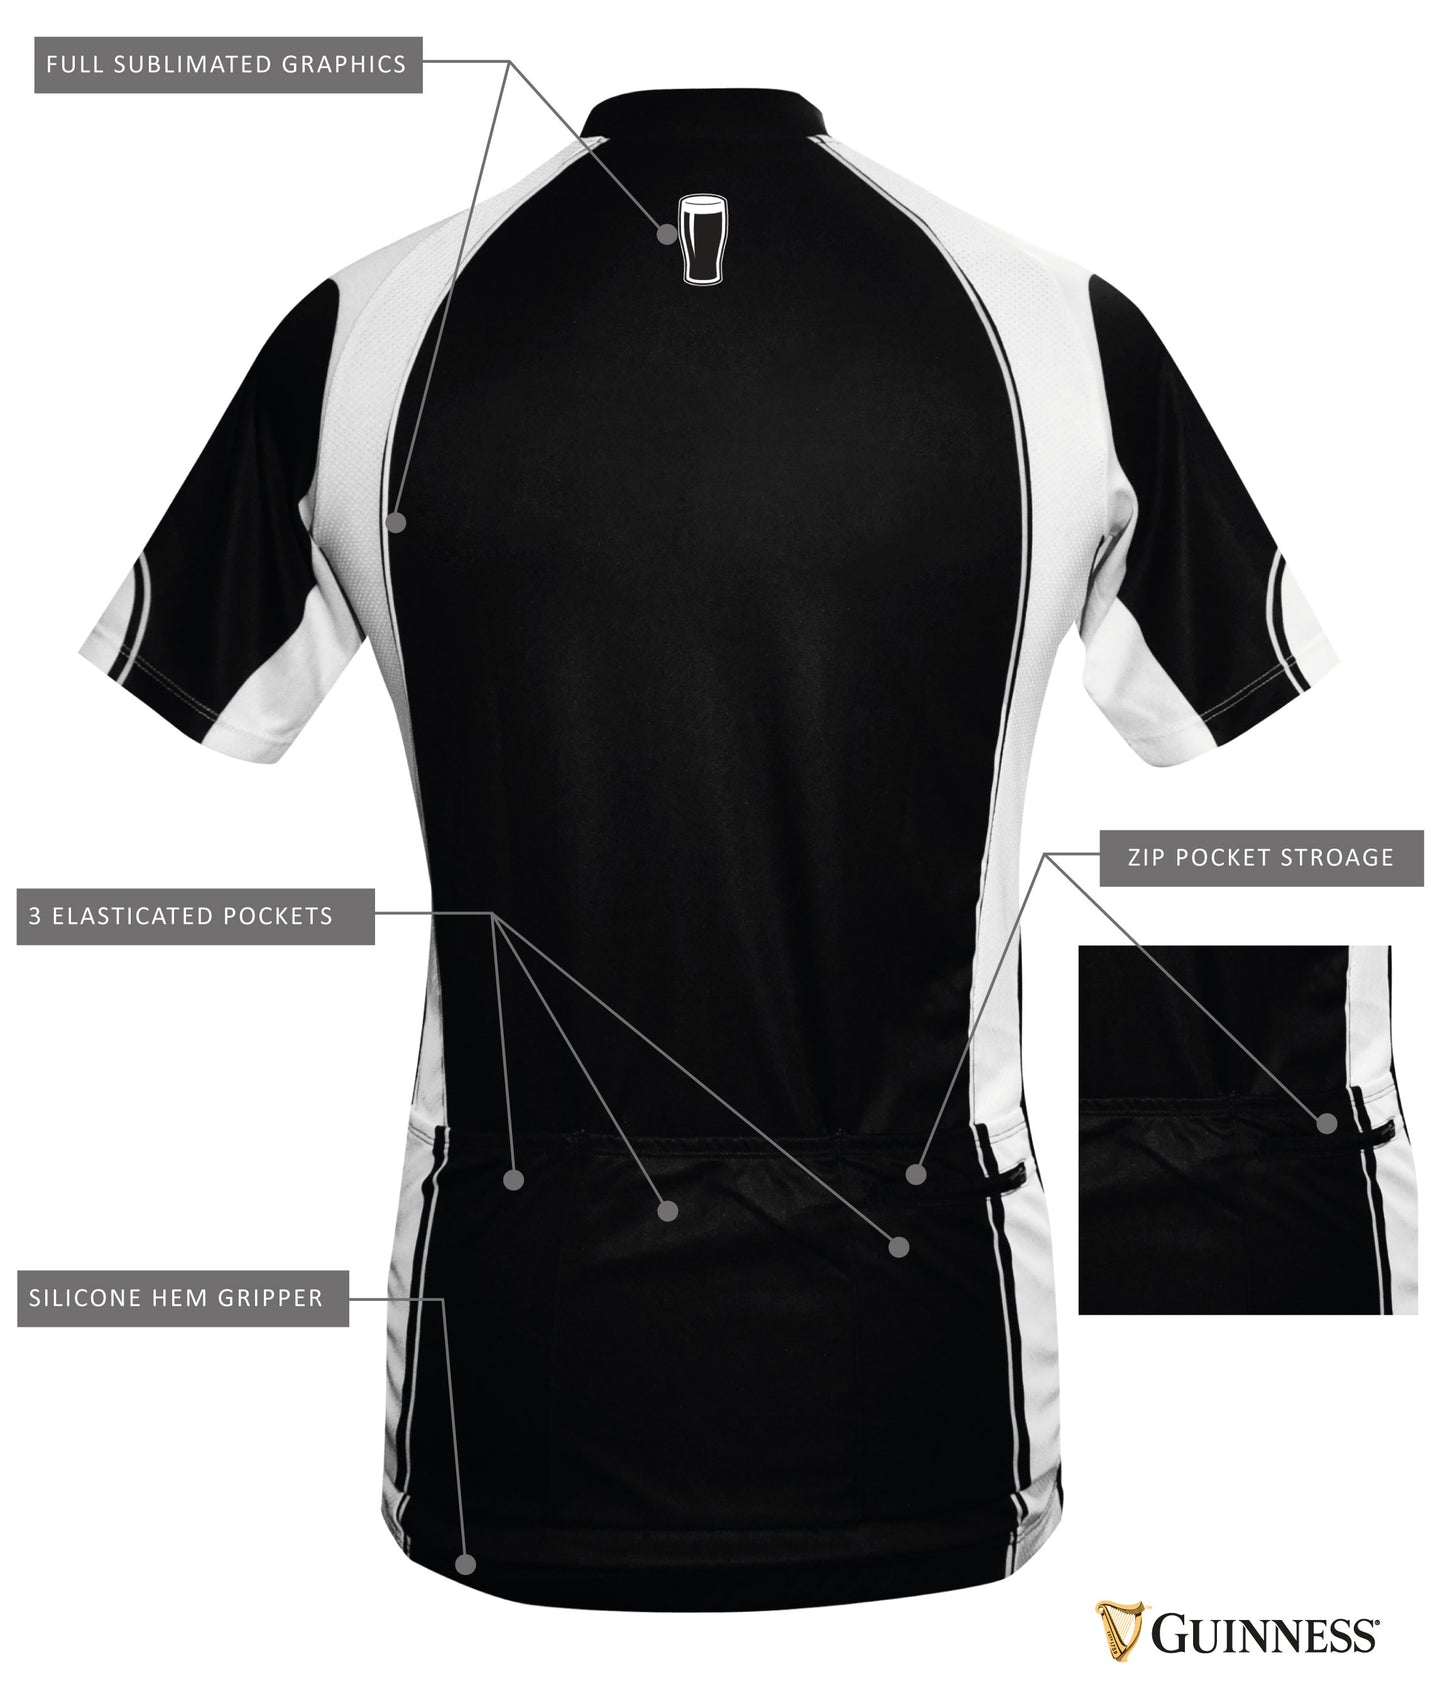 Guinness UK men's cycling jersey, crafted with a race cut for optimal performance results.